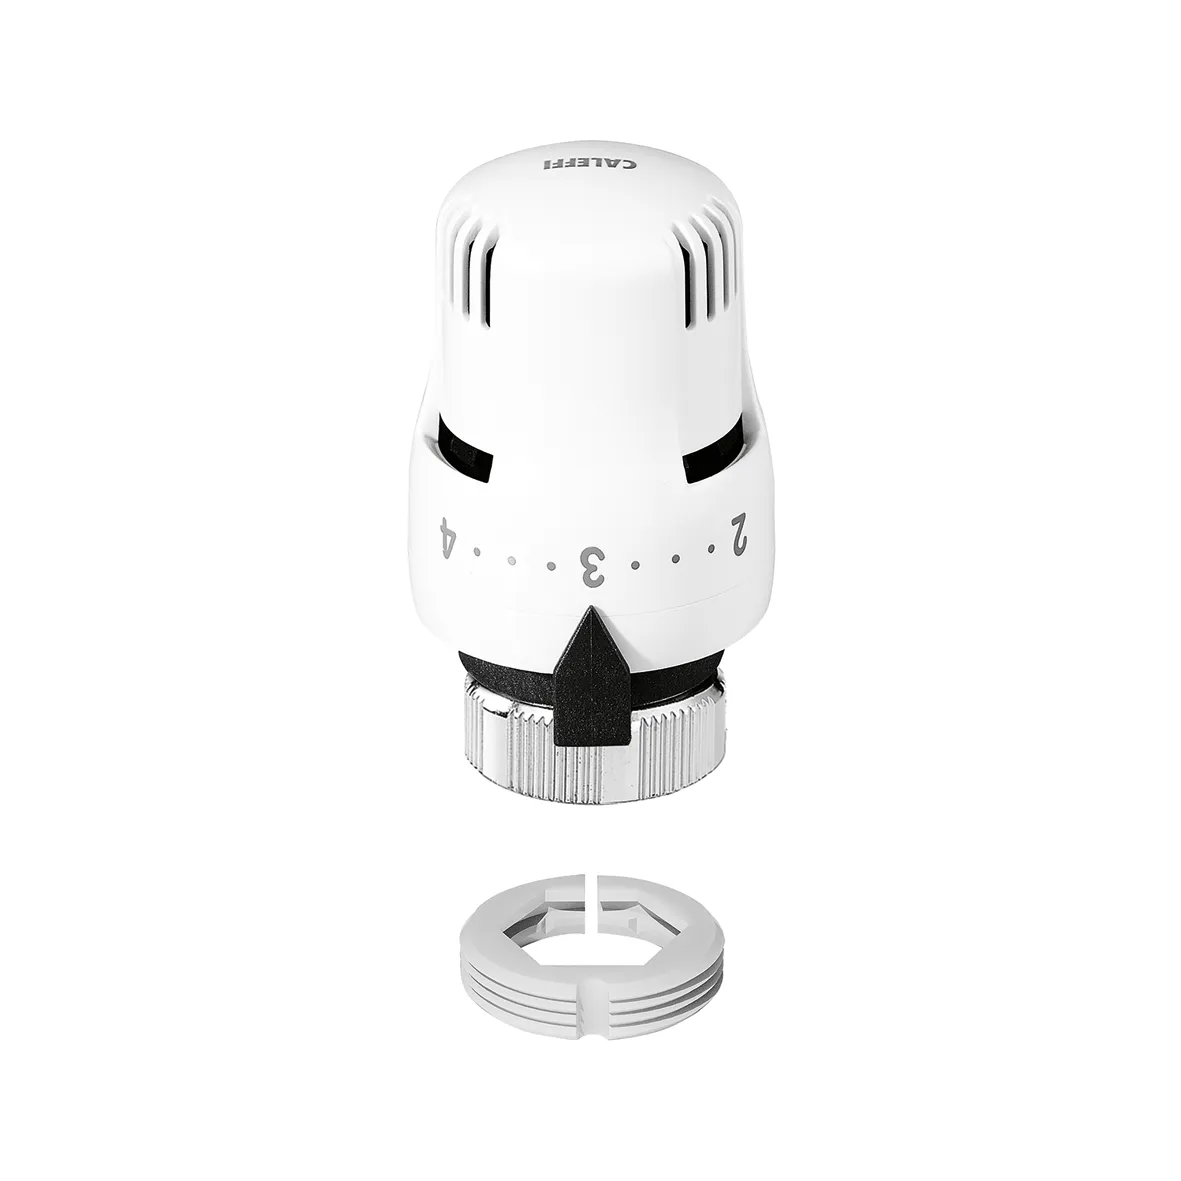 Thermostatic control head for convertible radiator valves. Built-in ...